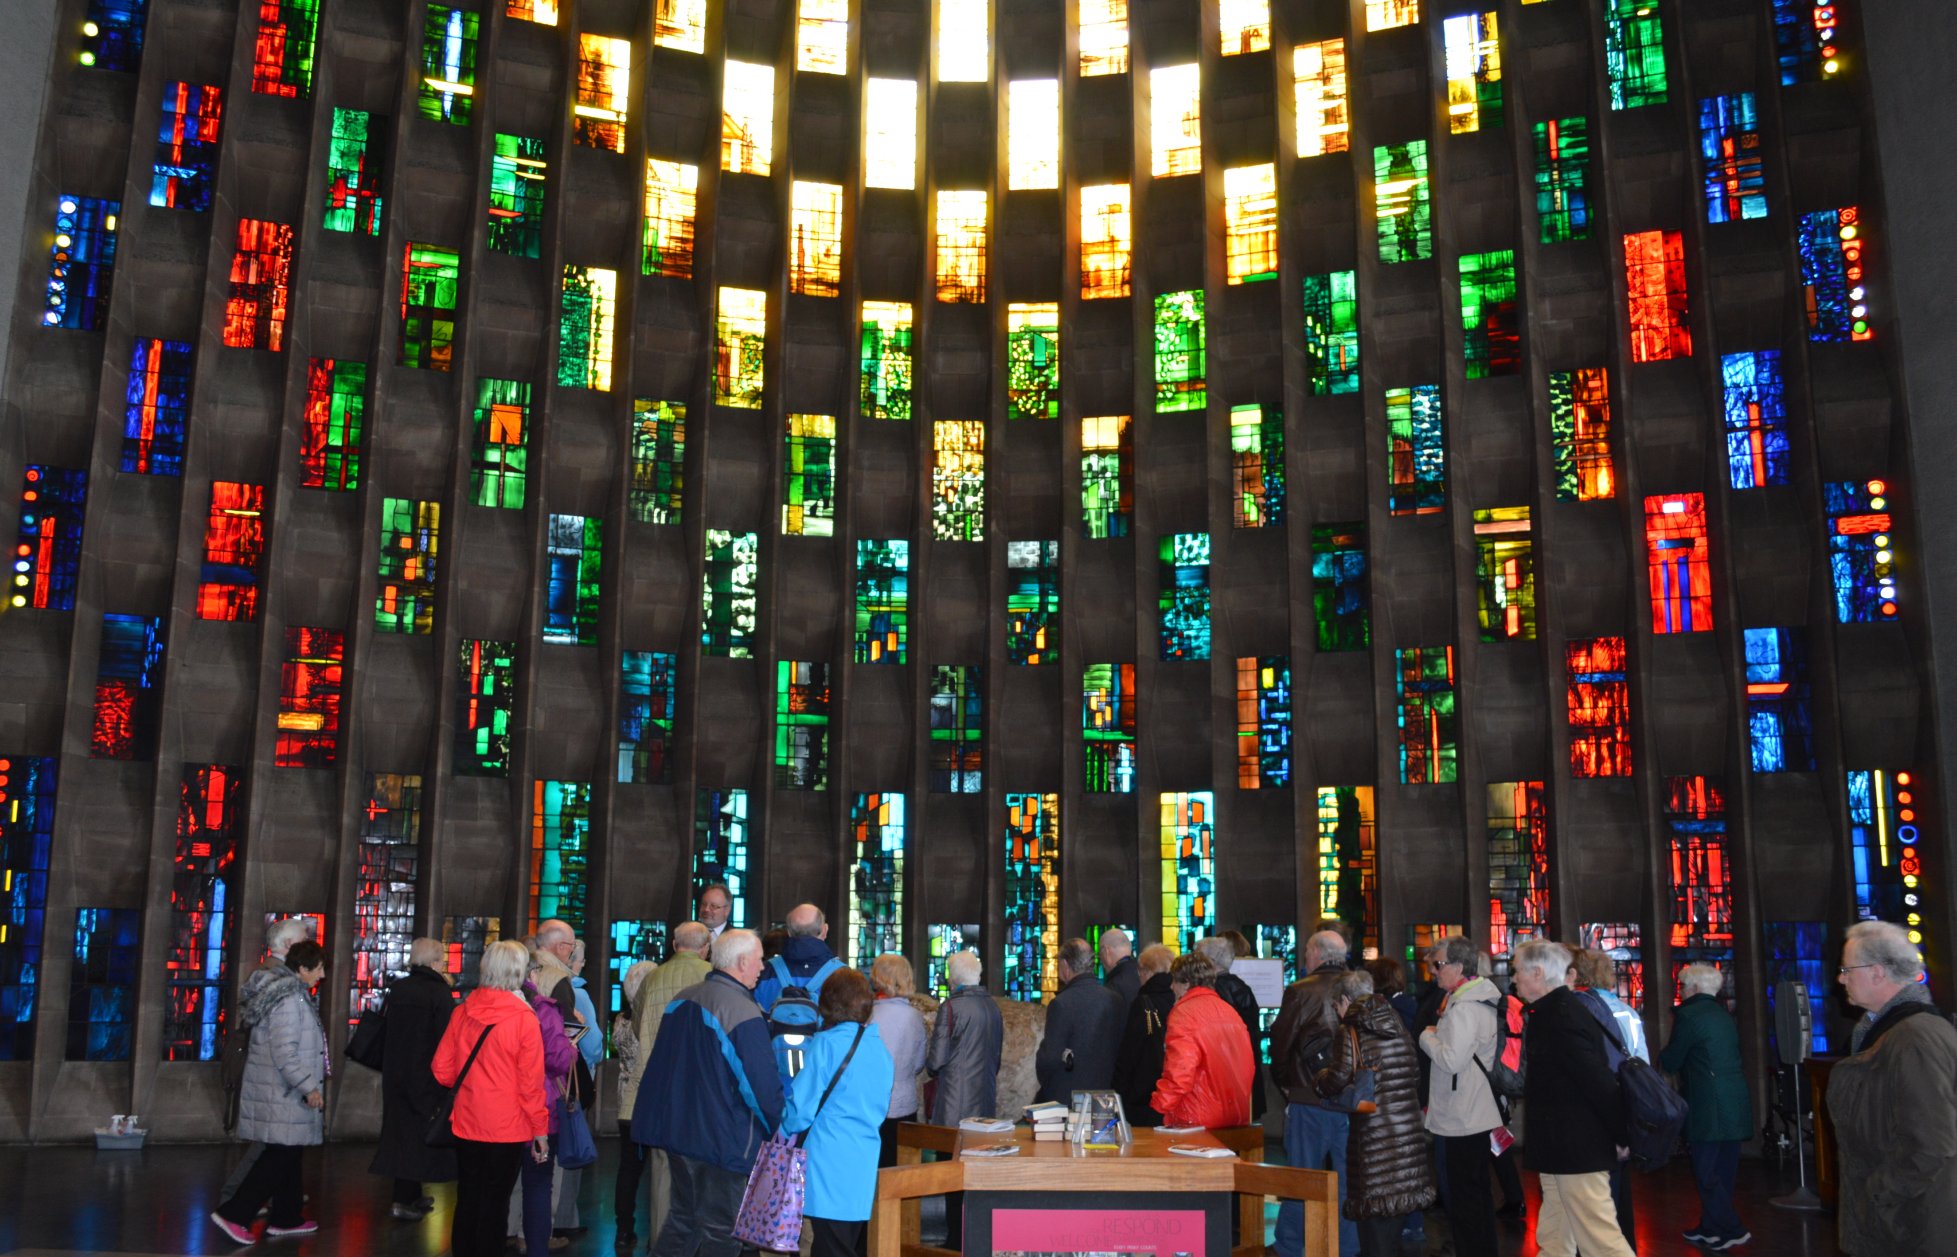 At Coventry Cathedral